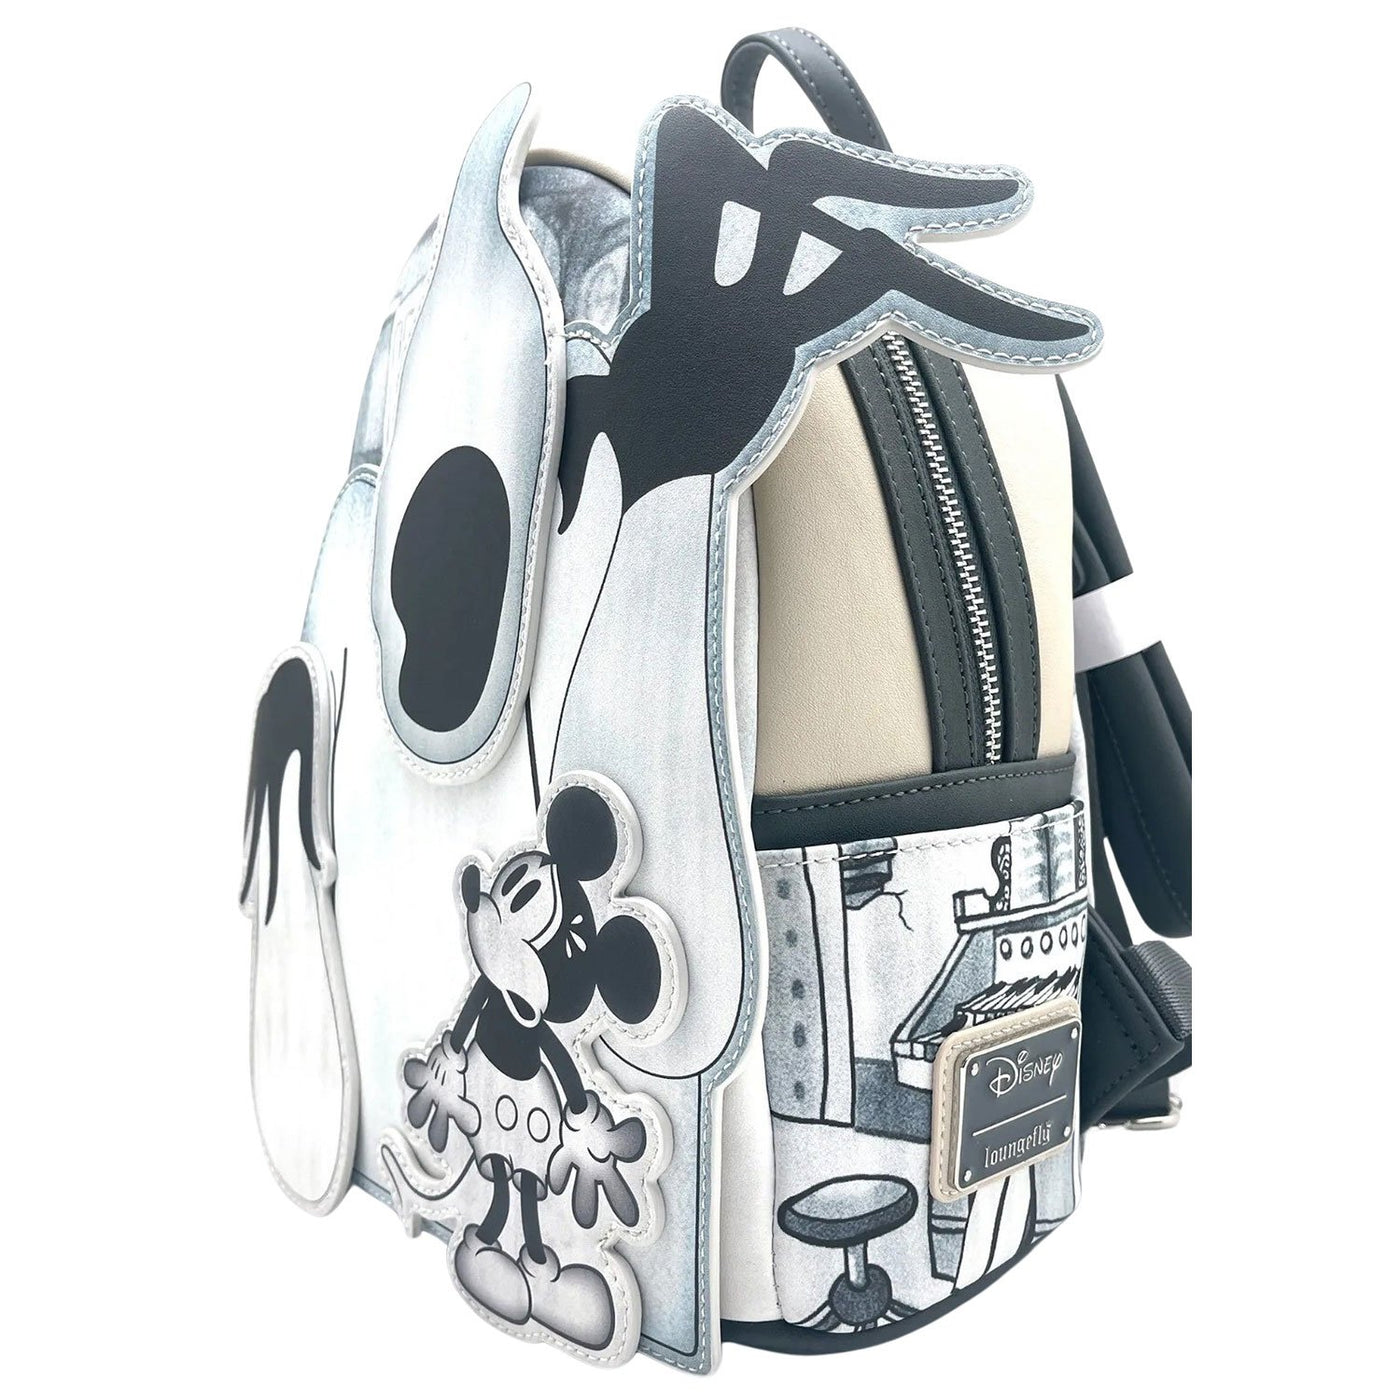 Side view of the Loungefly Disney Mickey Mouse Haunted House Mini Backpack, showing the ghost's extended hand and additional haunted house details in black and white.